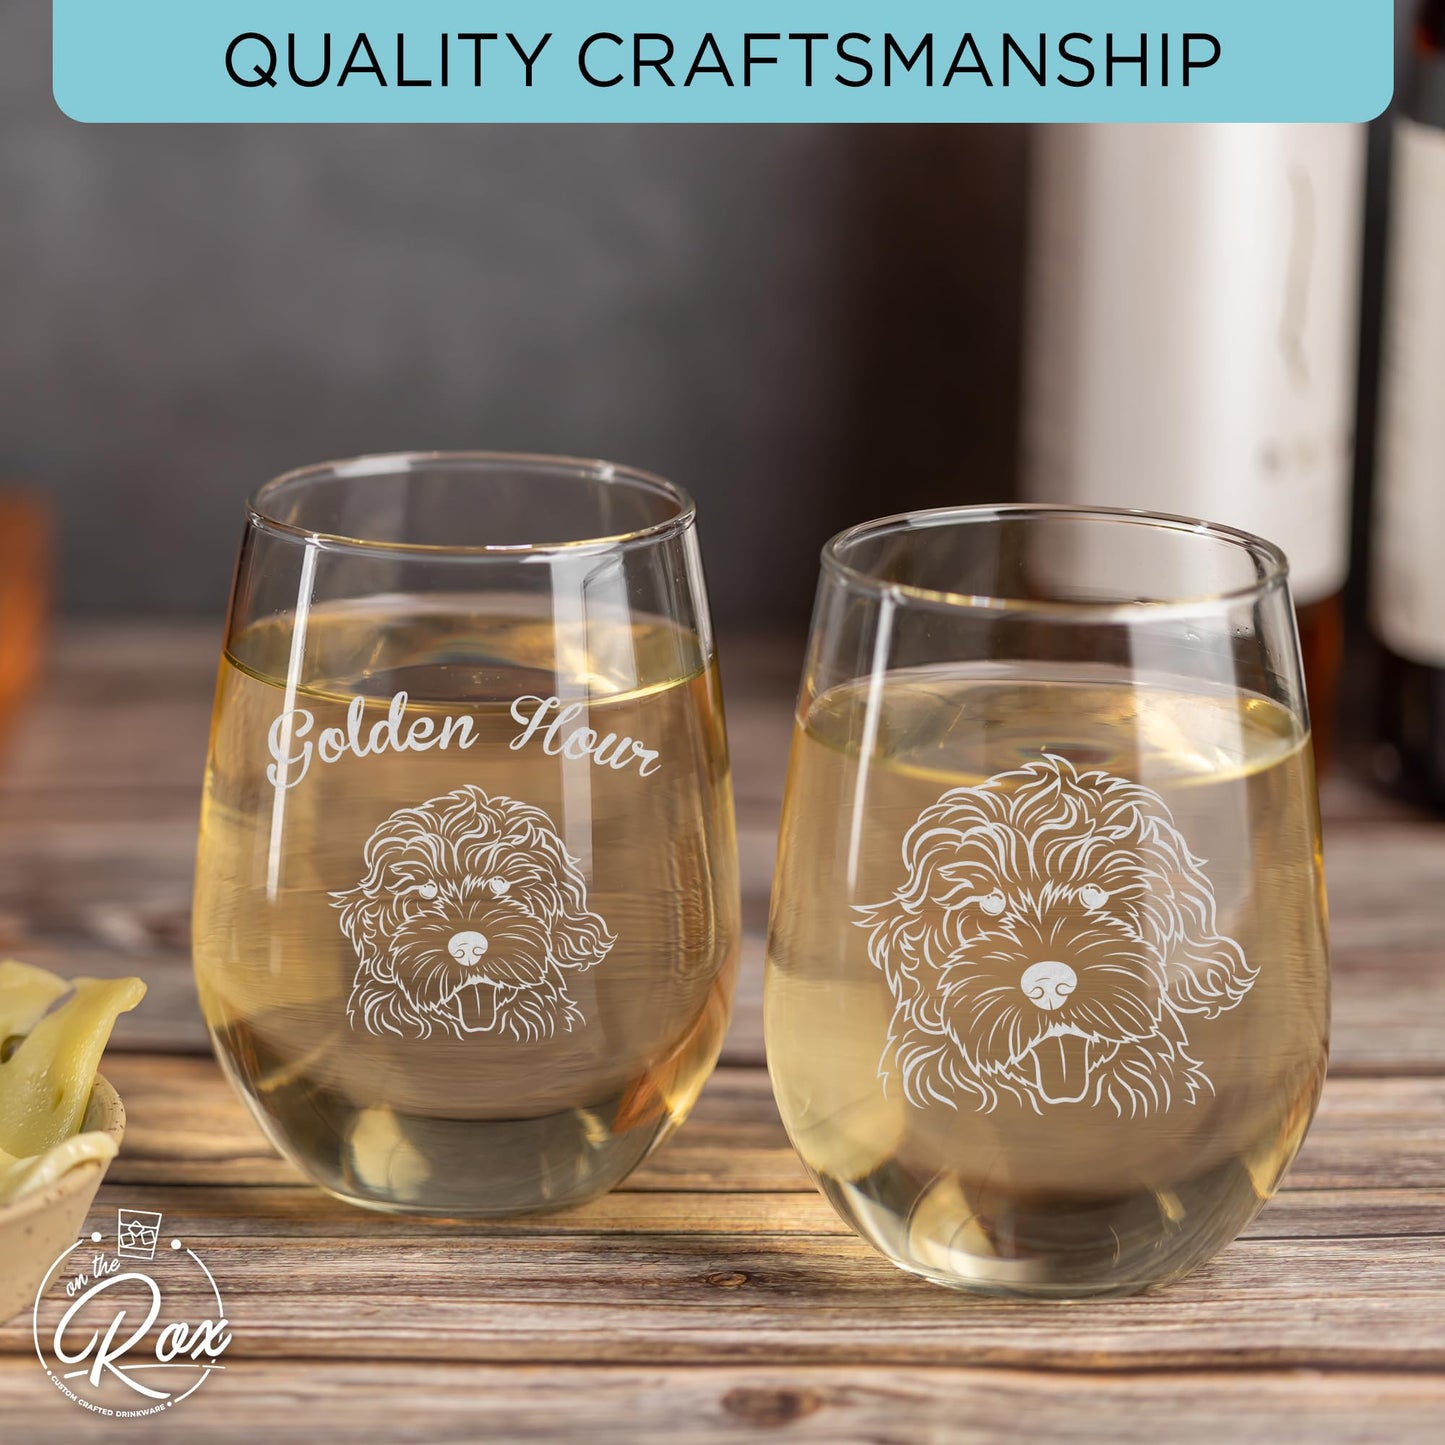 On The Rox Drinks Dog Gifts for Women - 17 Oz Golden Hour Stemless Wine Glass Set of 2 - Golden Doodle Gifts, Accessories for Golden Doodle Lovers - Funny Golden Retriever-Poodle Wine Cups for Mom